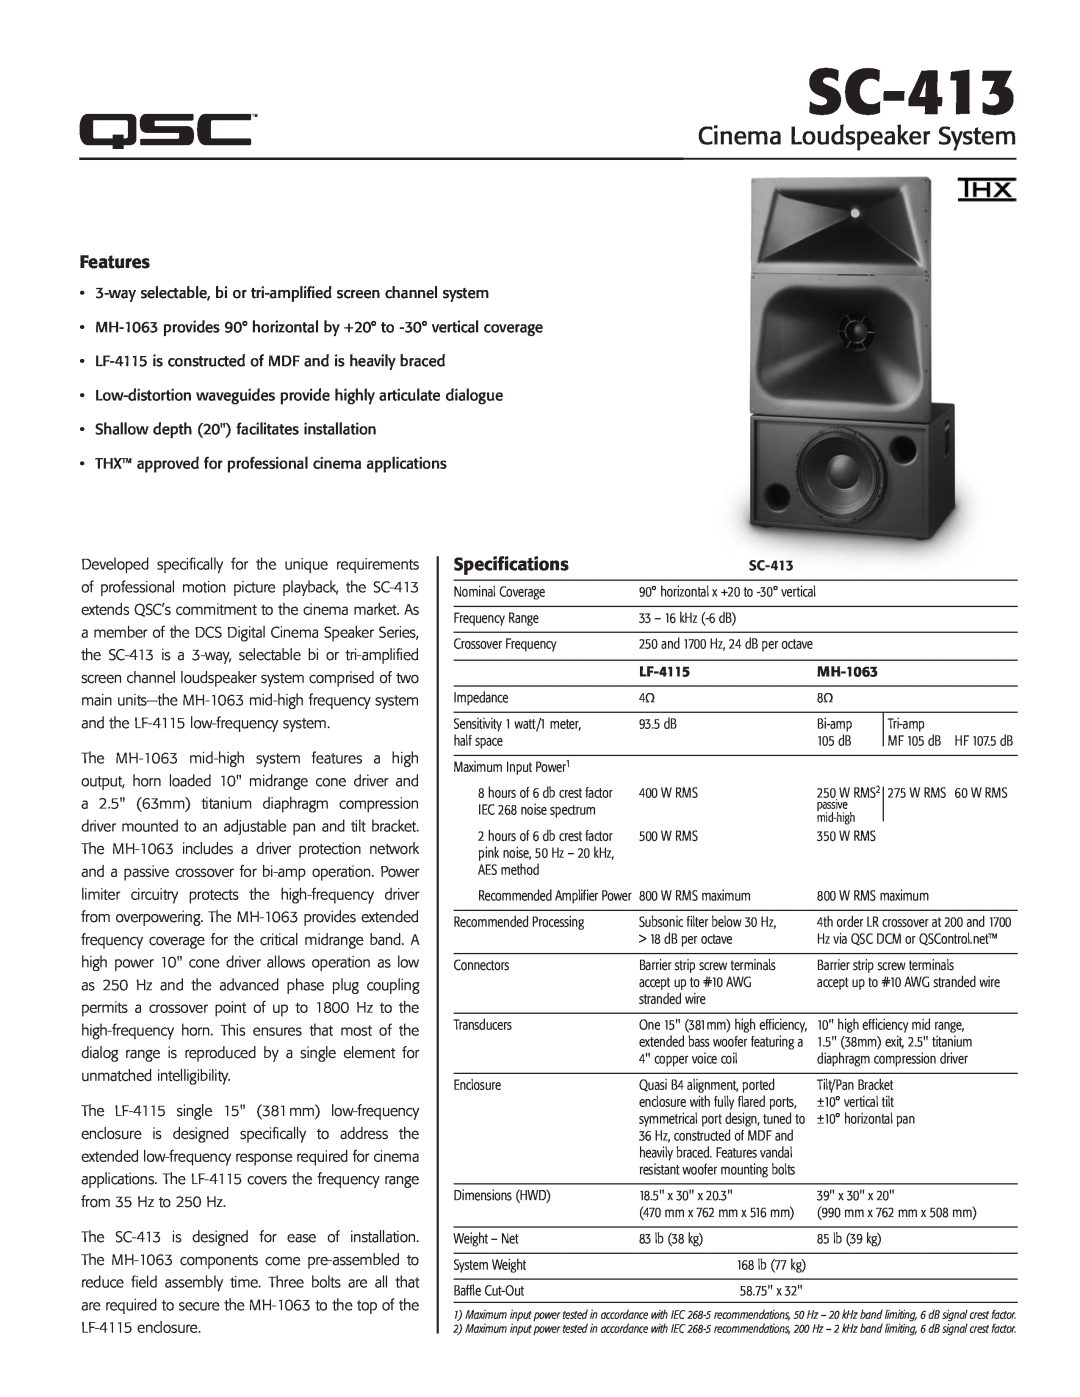 QSC Audio SC-413 specifications Features, Specifications, Cinema Loudspeaker System 